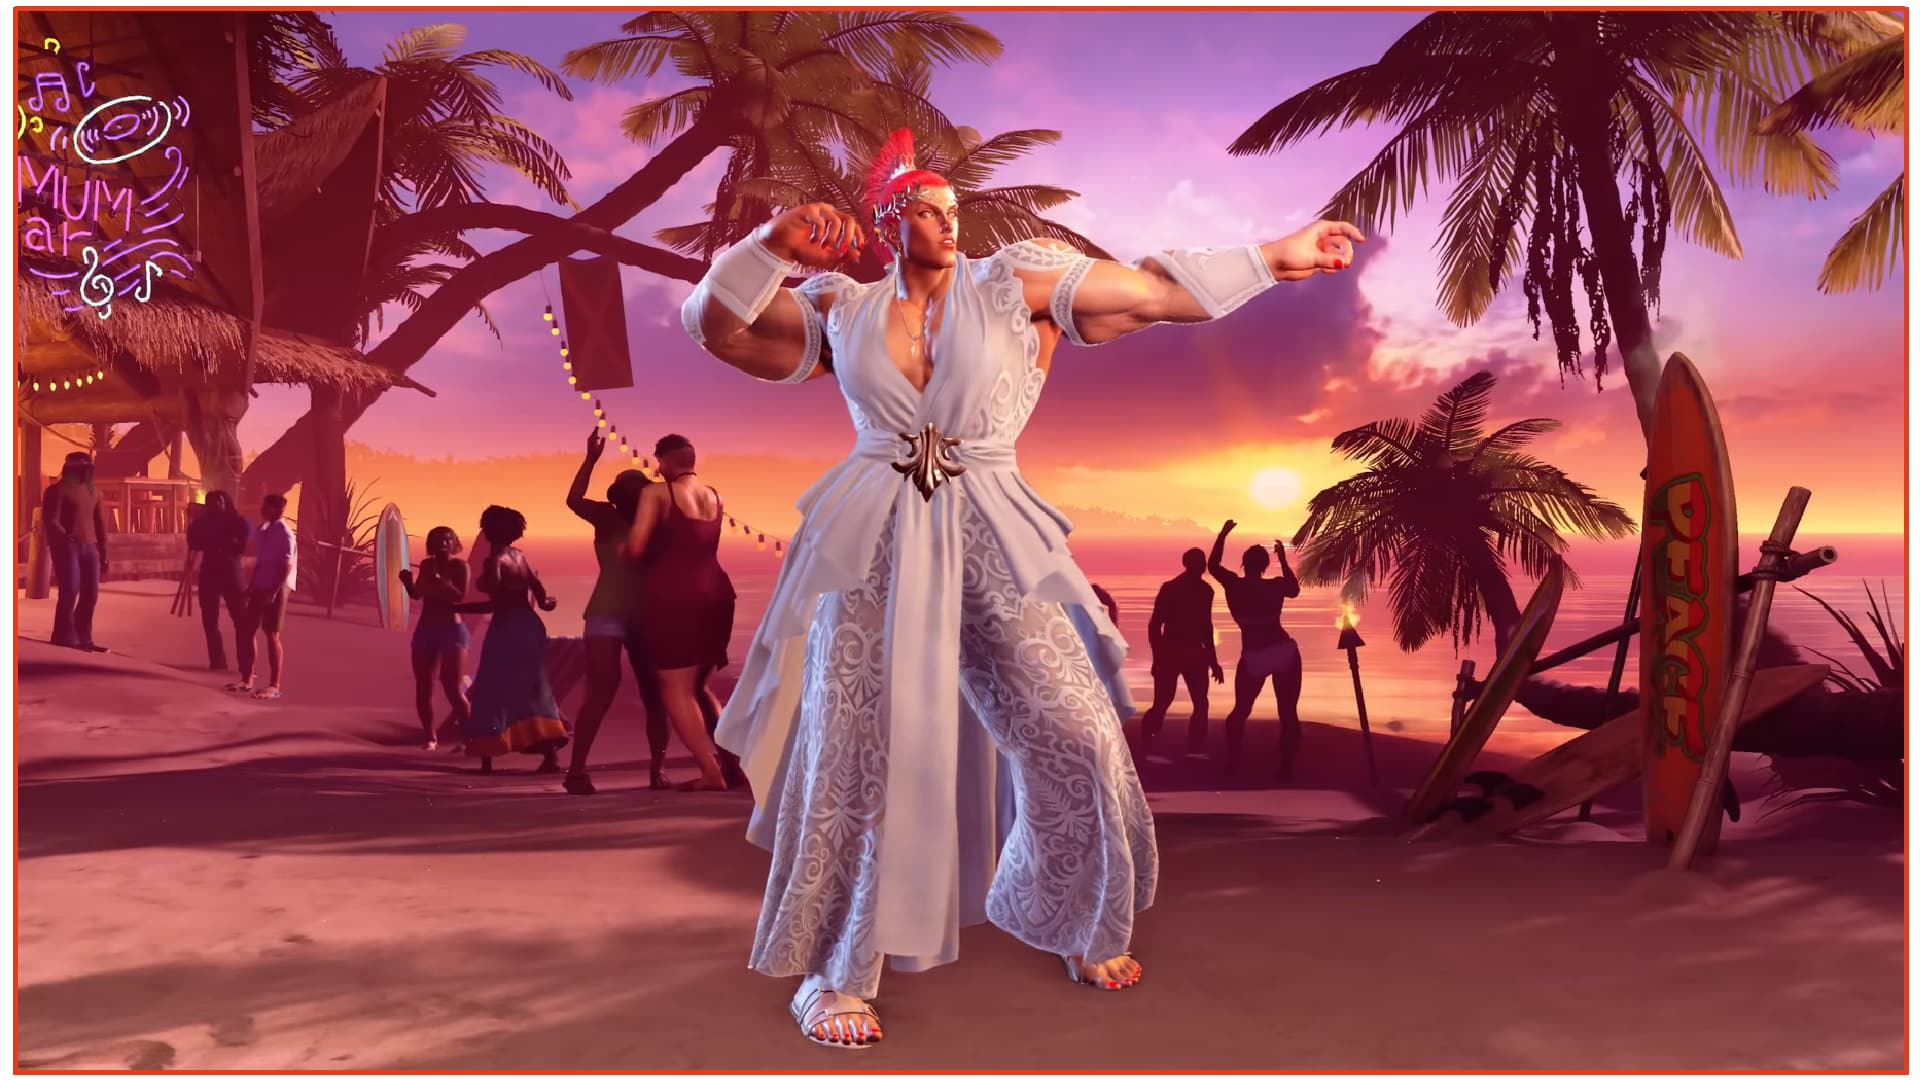 Street Fighter 6 Fighting Ground explained